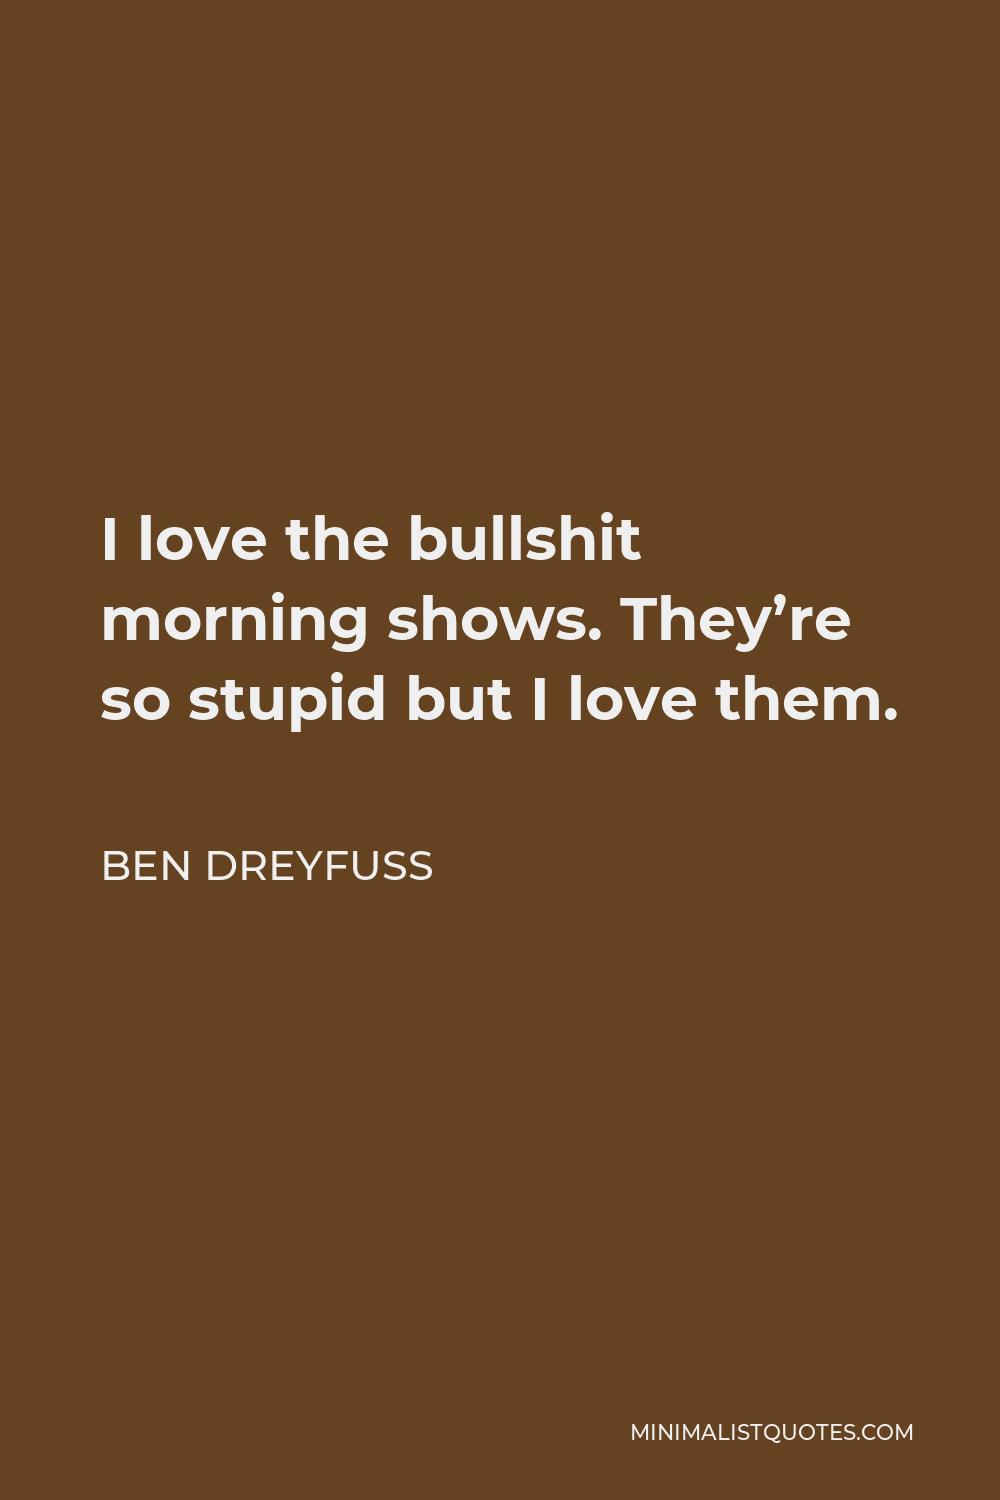 Ben Dreyfuss Quote - I love the bullshit morning shows. They’re so stupid but I love them.